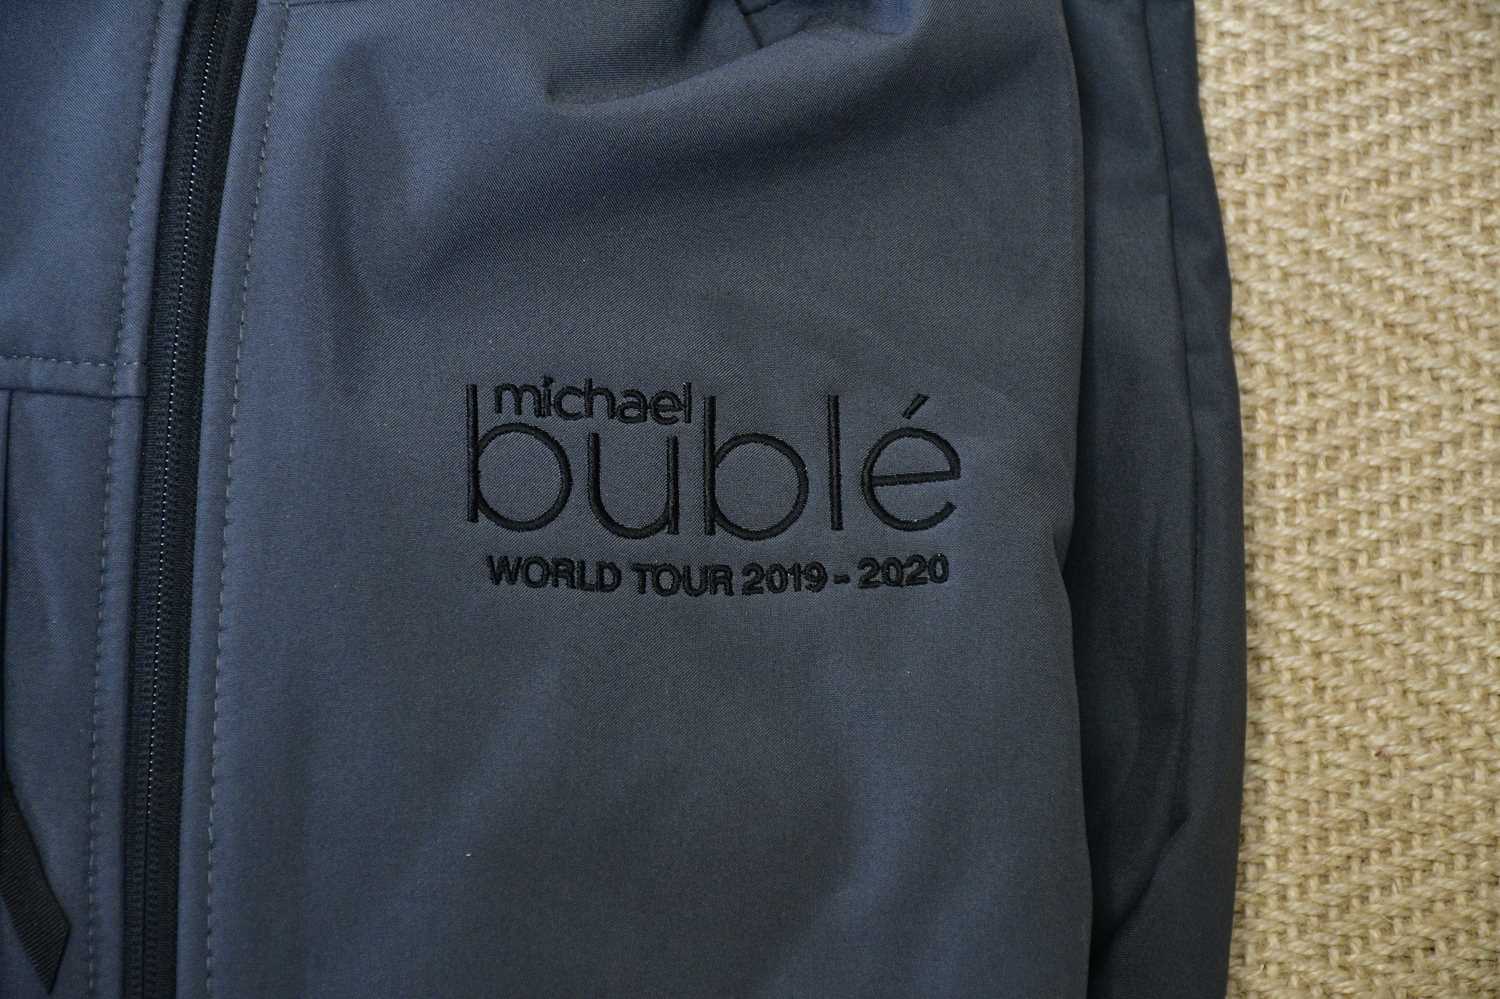 MICHAEL BUBLÉ; a stage crew World Tour 2009-2020 jacket and a laptop bag. - Image 2 of 6